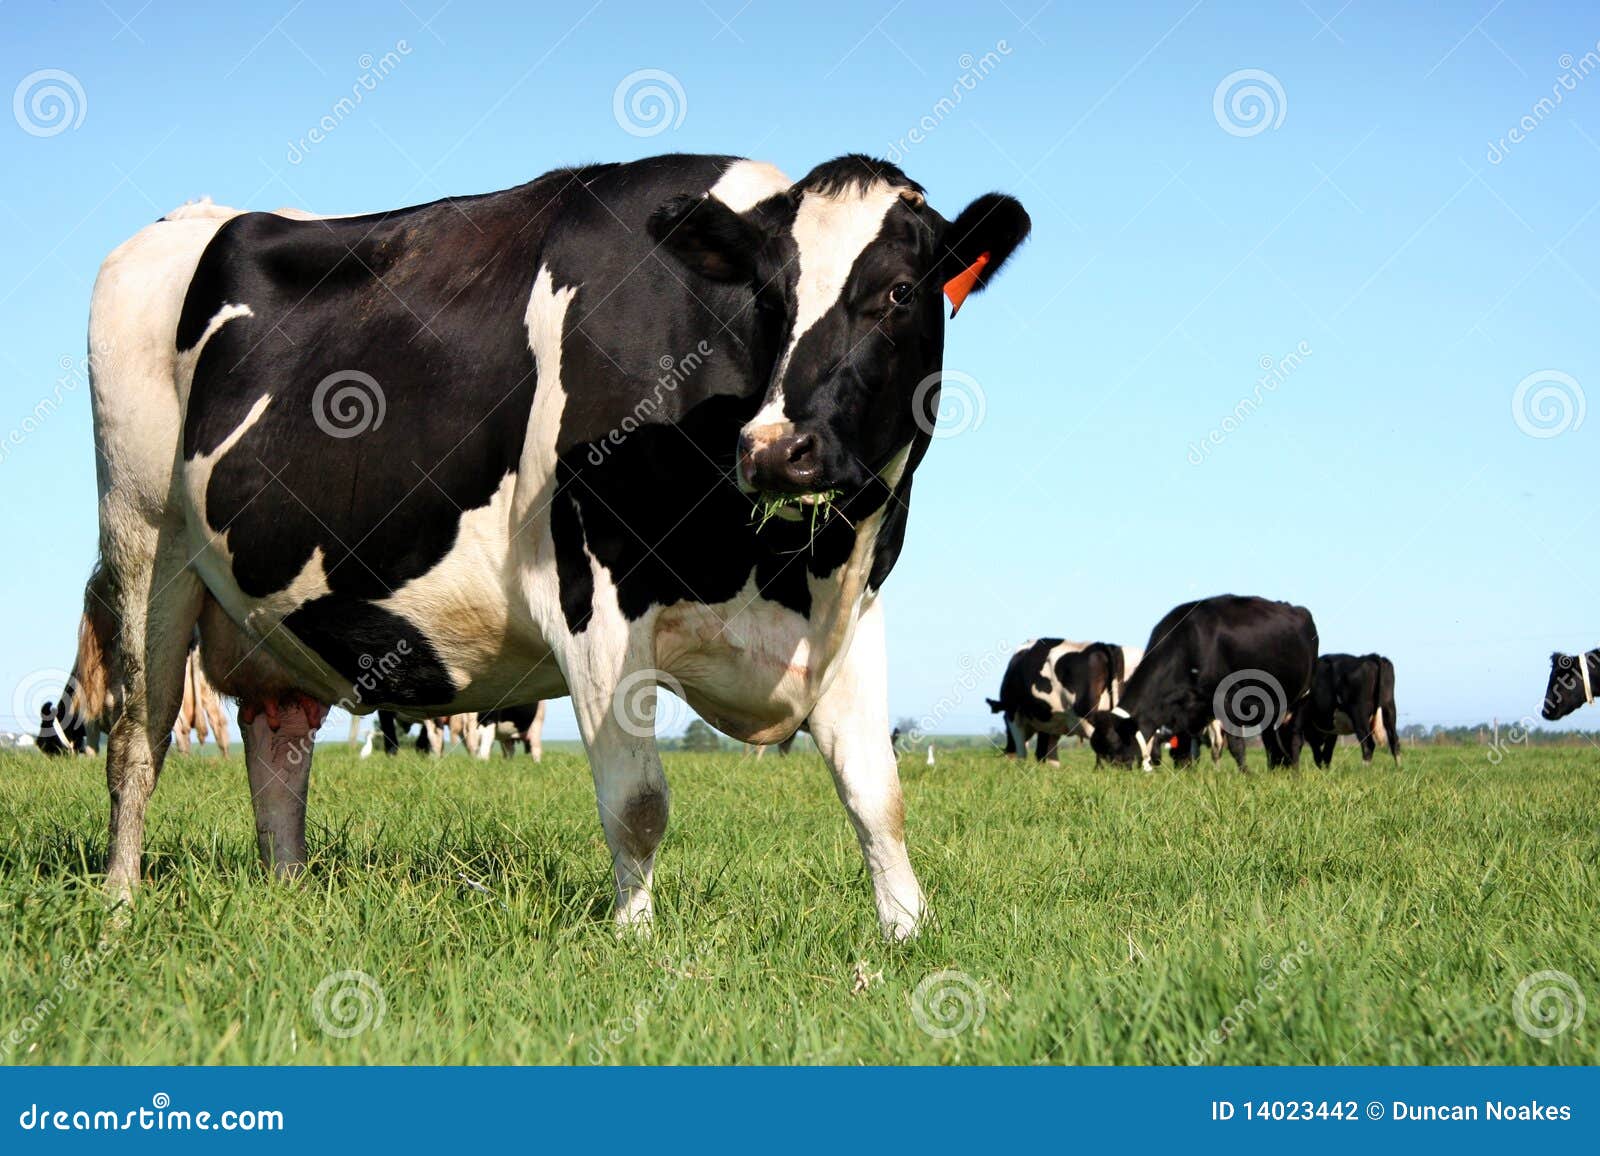 dairy cows in pasture